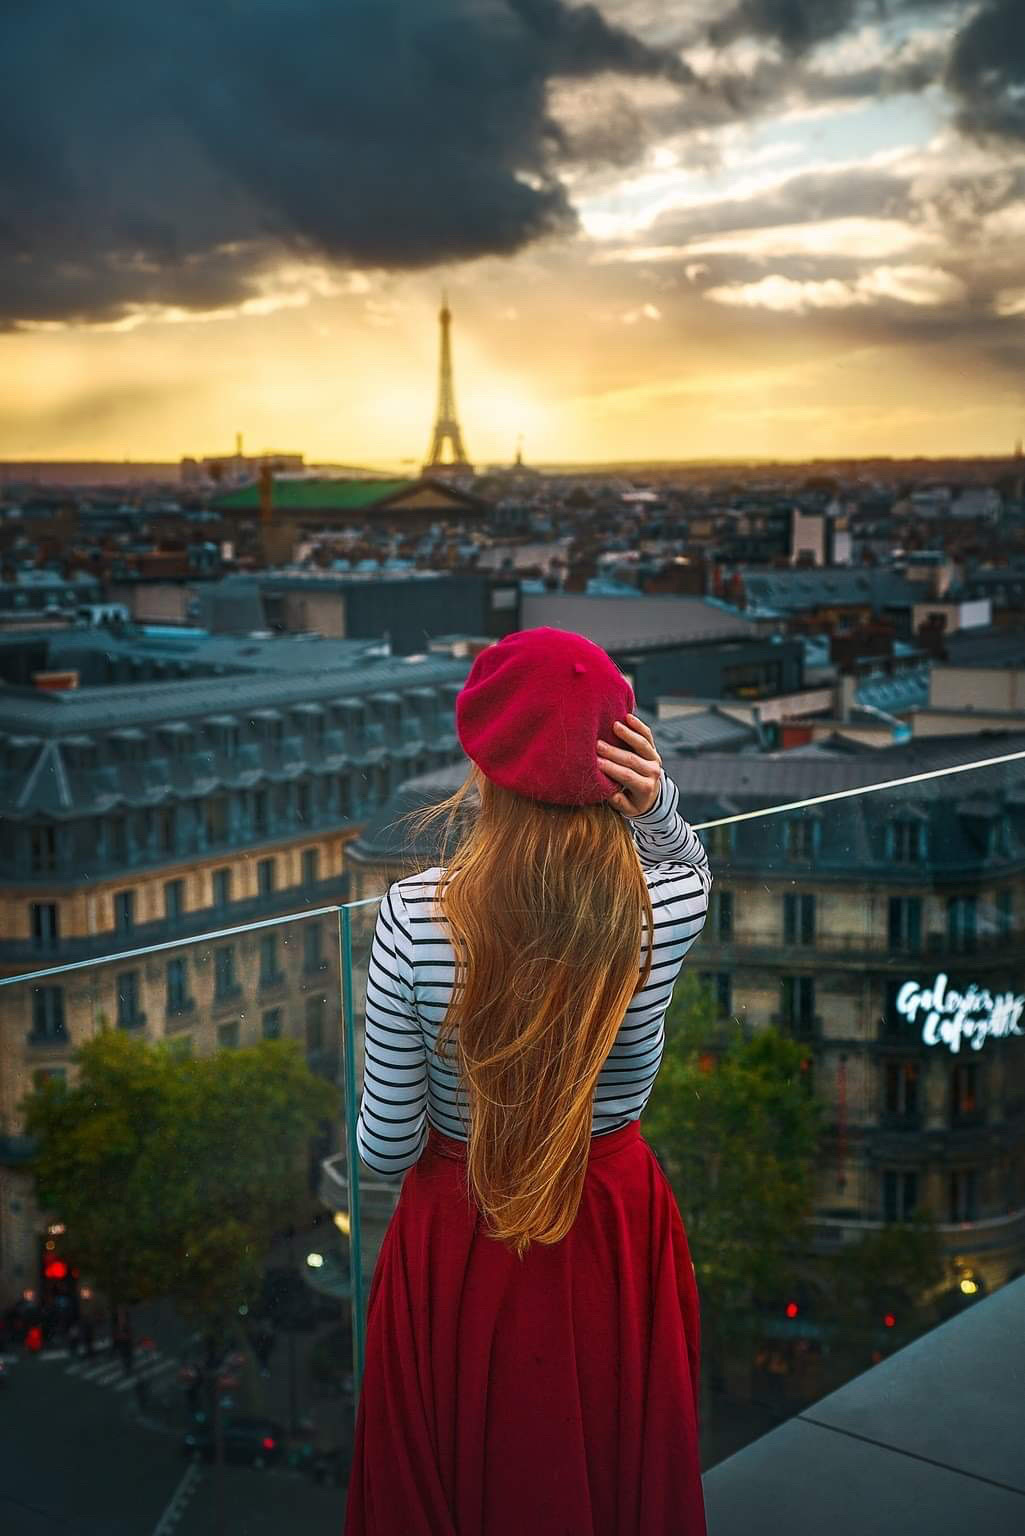 A girl in a red skirt standing at the Free rooftop of Galleries Lafyette overlooking Paris at sunset